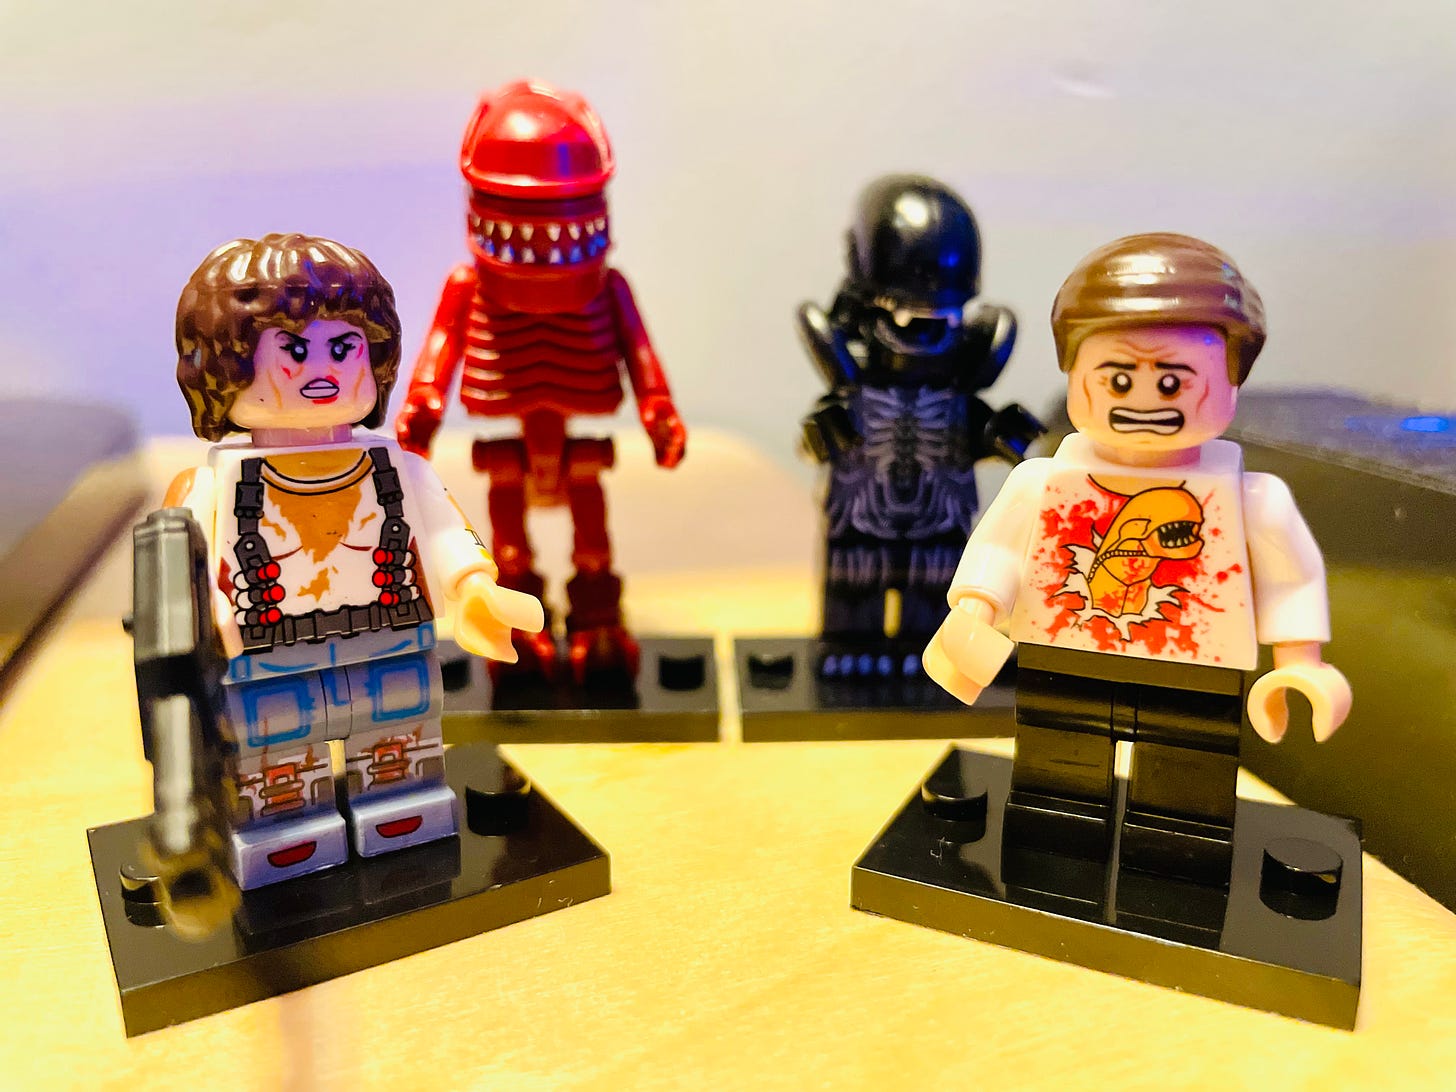 Lego minifigures from the Alien movies